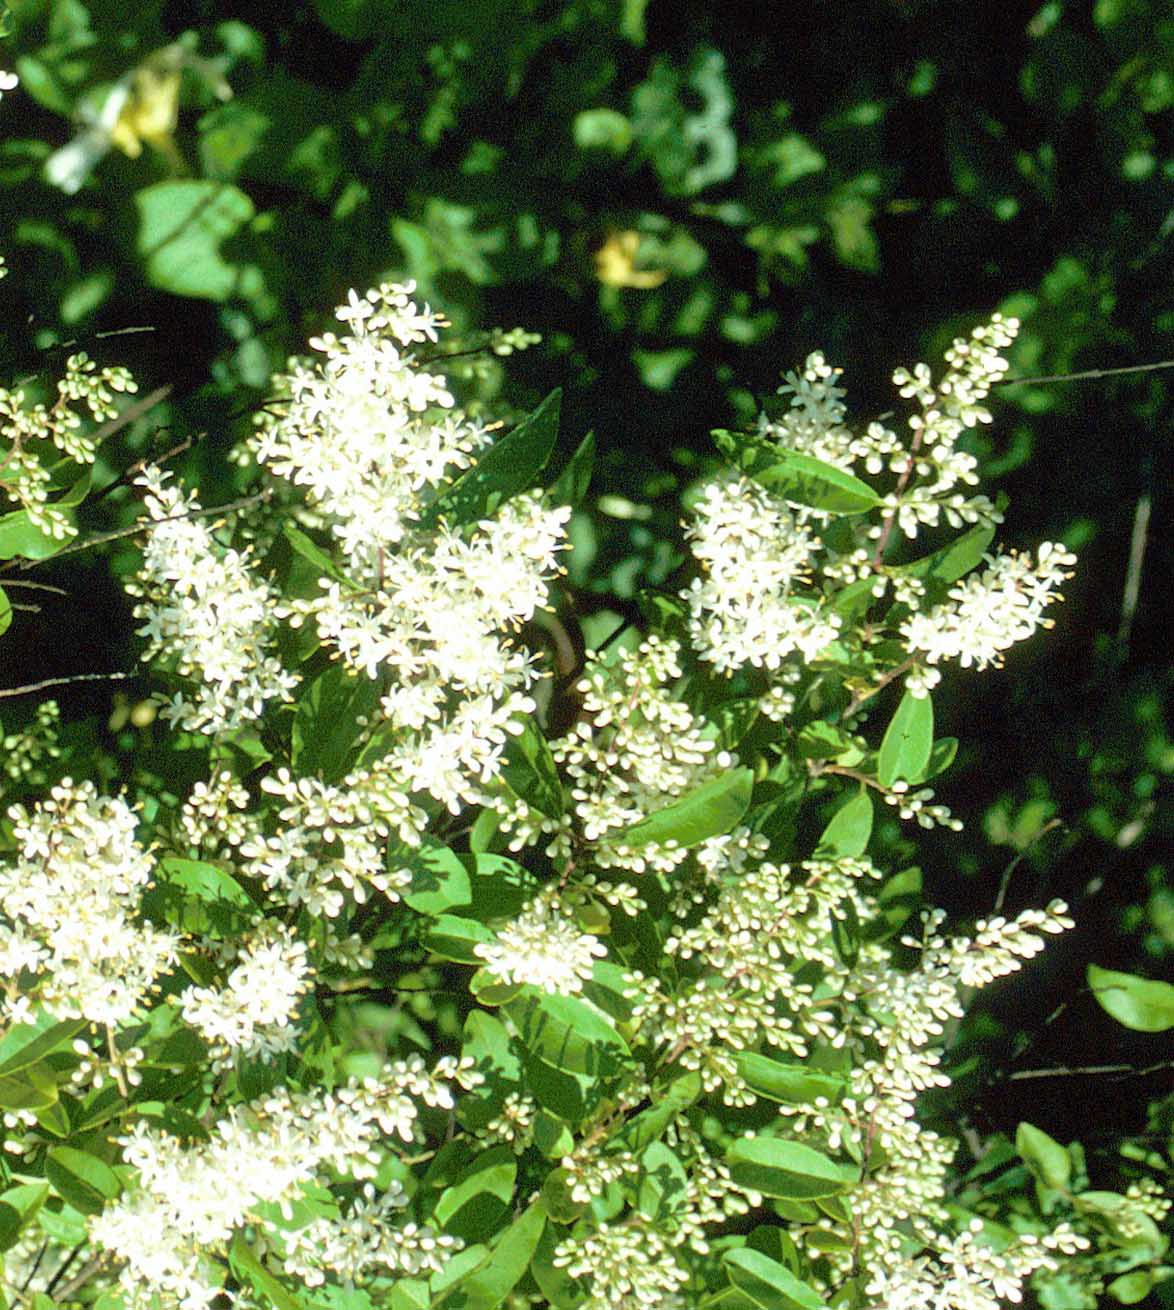 Chinese Privet is so widespread across Georgia that many people believe it's a native species, but it's actually invasive.